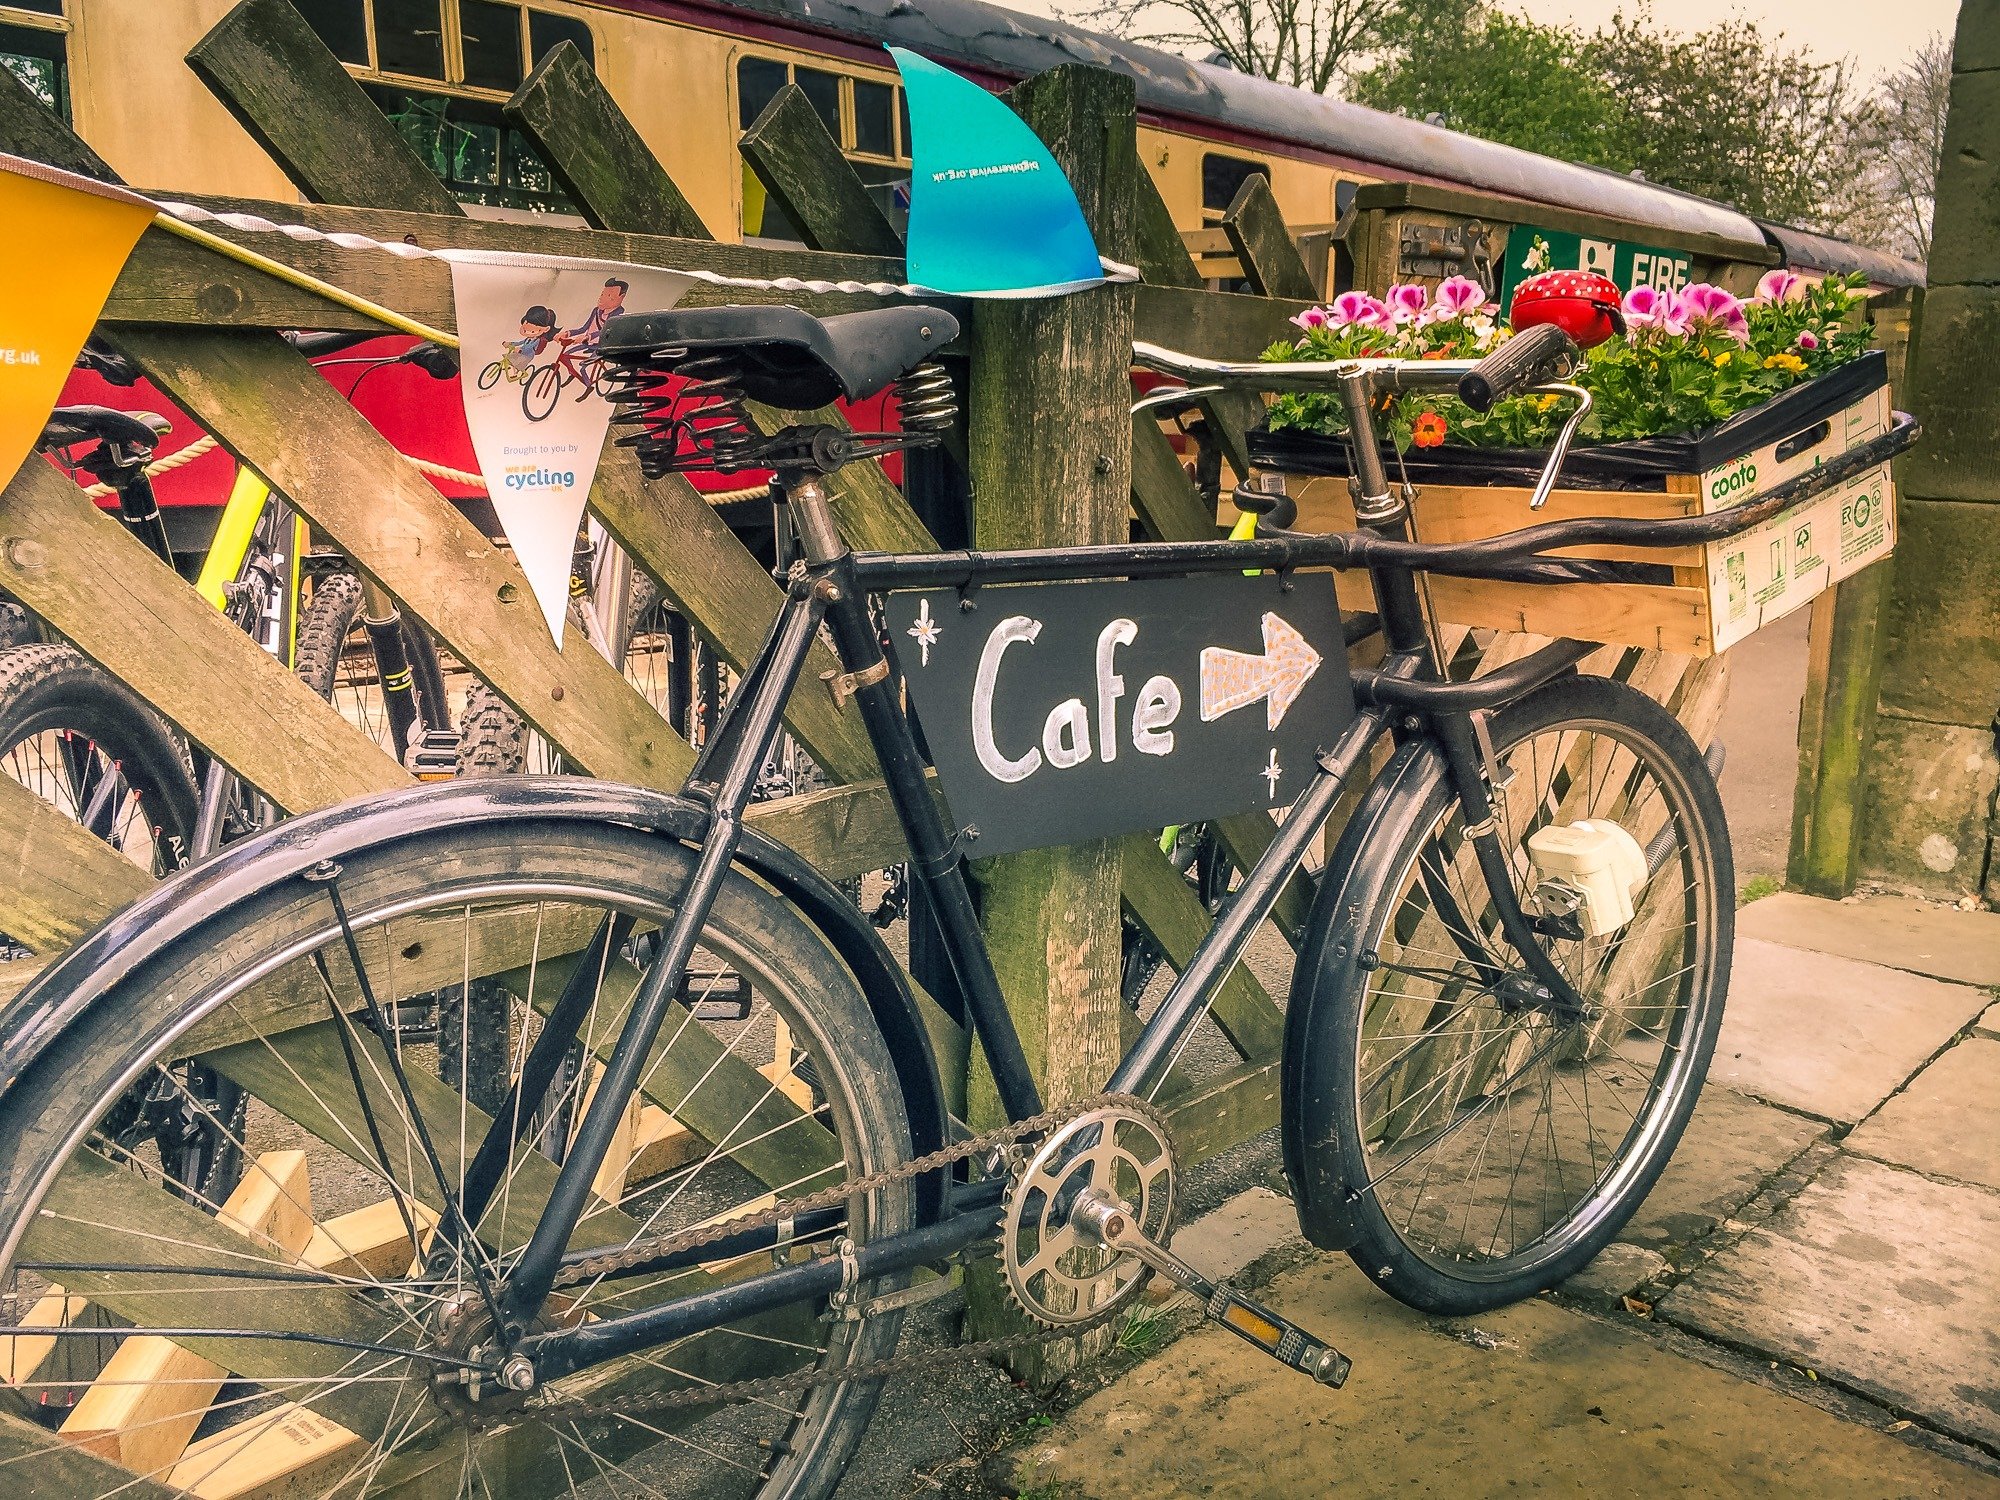 Stage 1 Cycles by the Firebox Cafe in Hawes